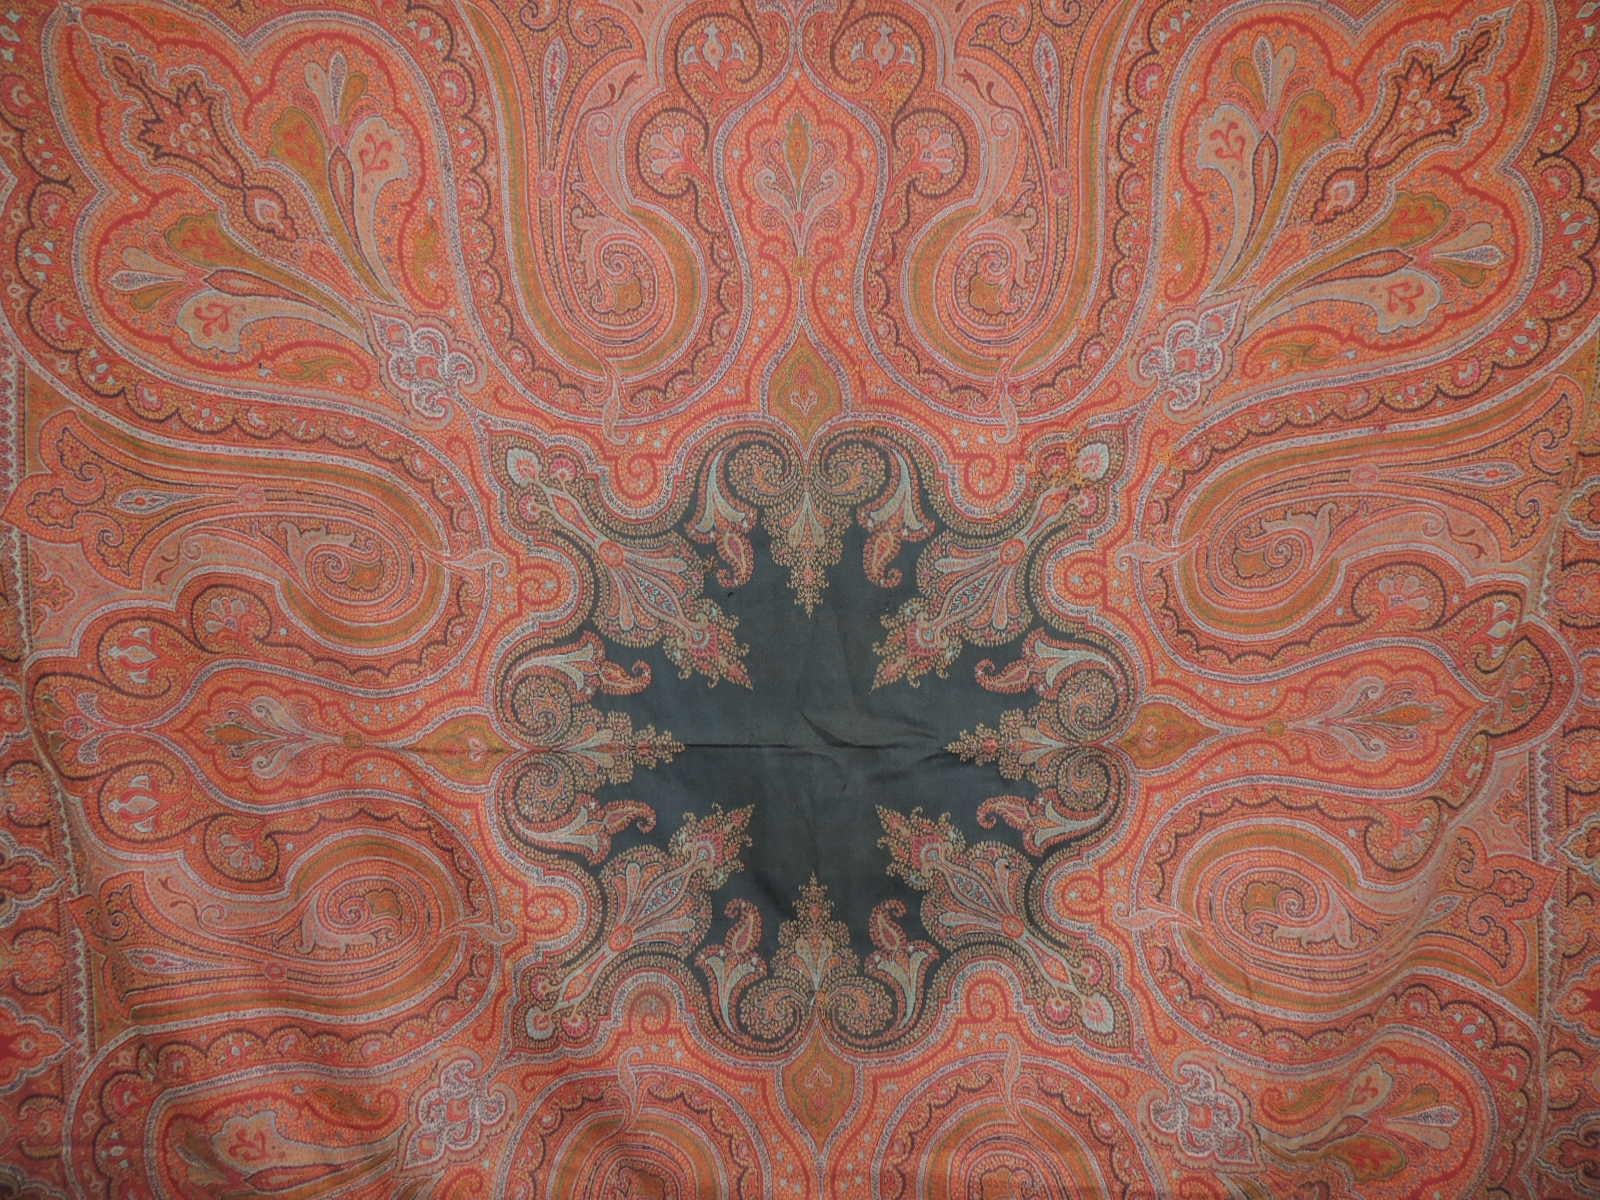 Large Kashmir embroidered paisley coverlet, throw, cloth or shawl with dark wool and backing, boteh border all around. Needlework technique known as Rafugar;
Separately woven and joined to the field, center medallion in dark wool. Predominately in